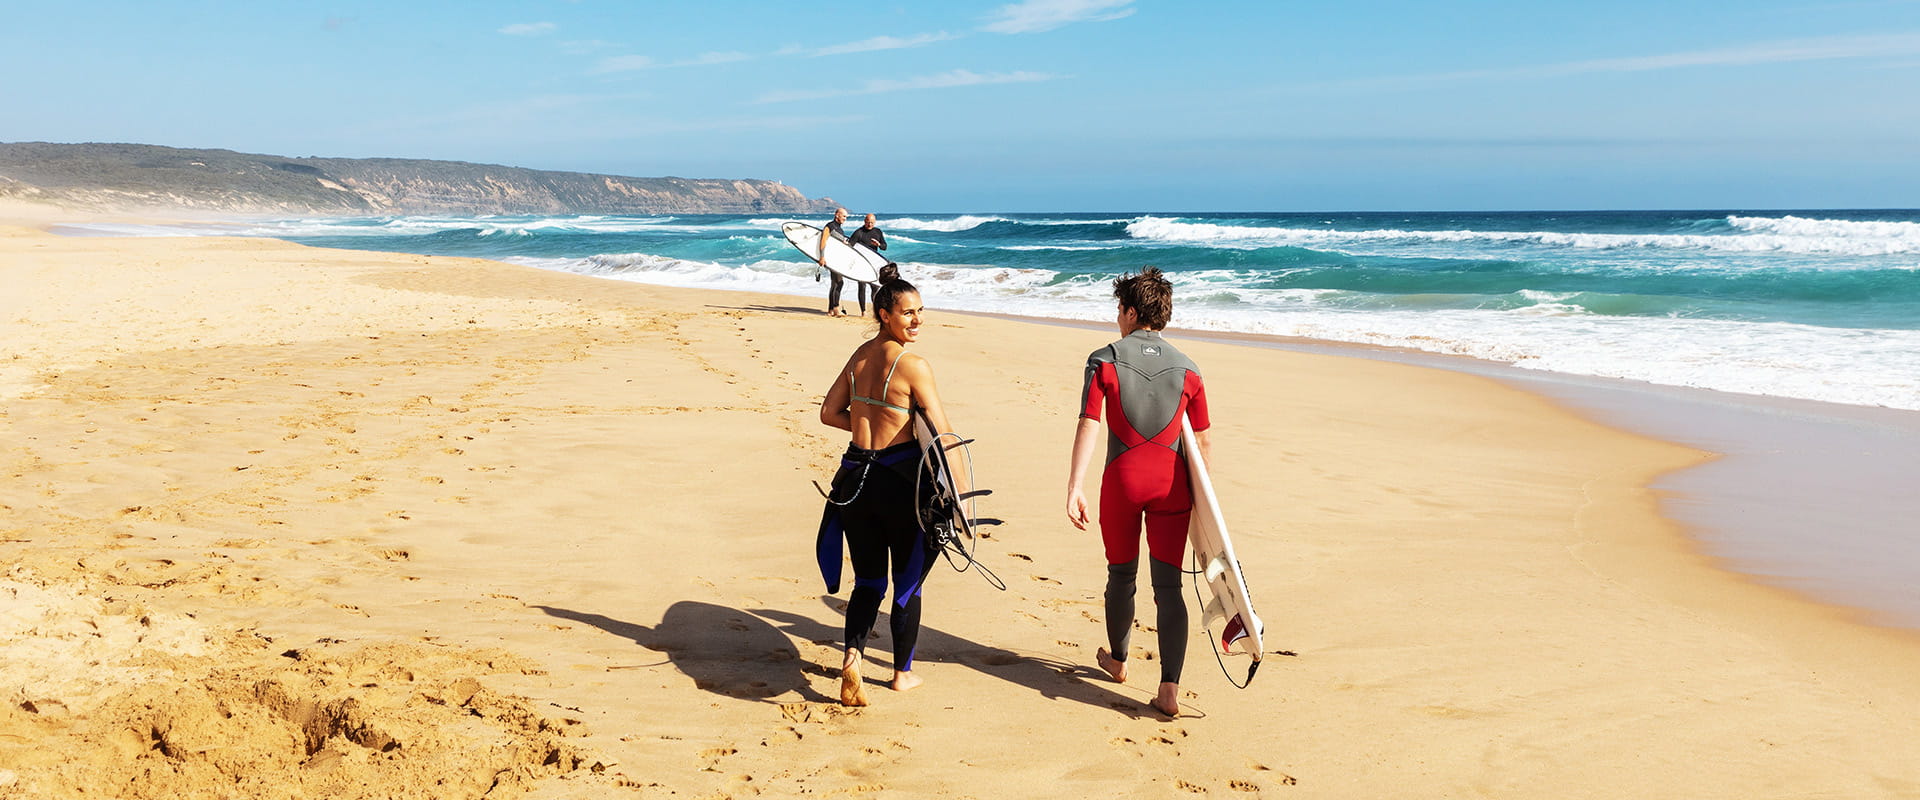 Two surfers in wetsuits carring surfboards walk near the waters edge on a sandy surf beach with coastal cliffs in the far distant background.